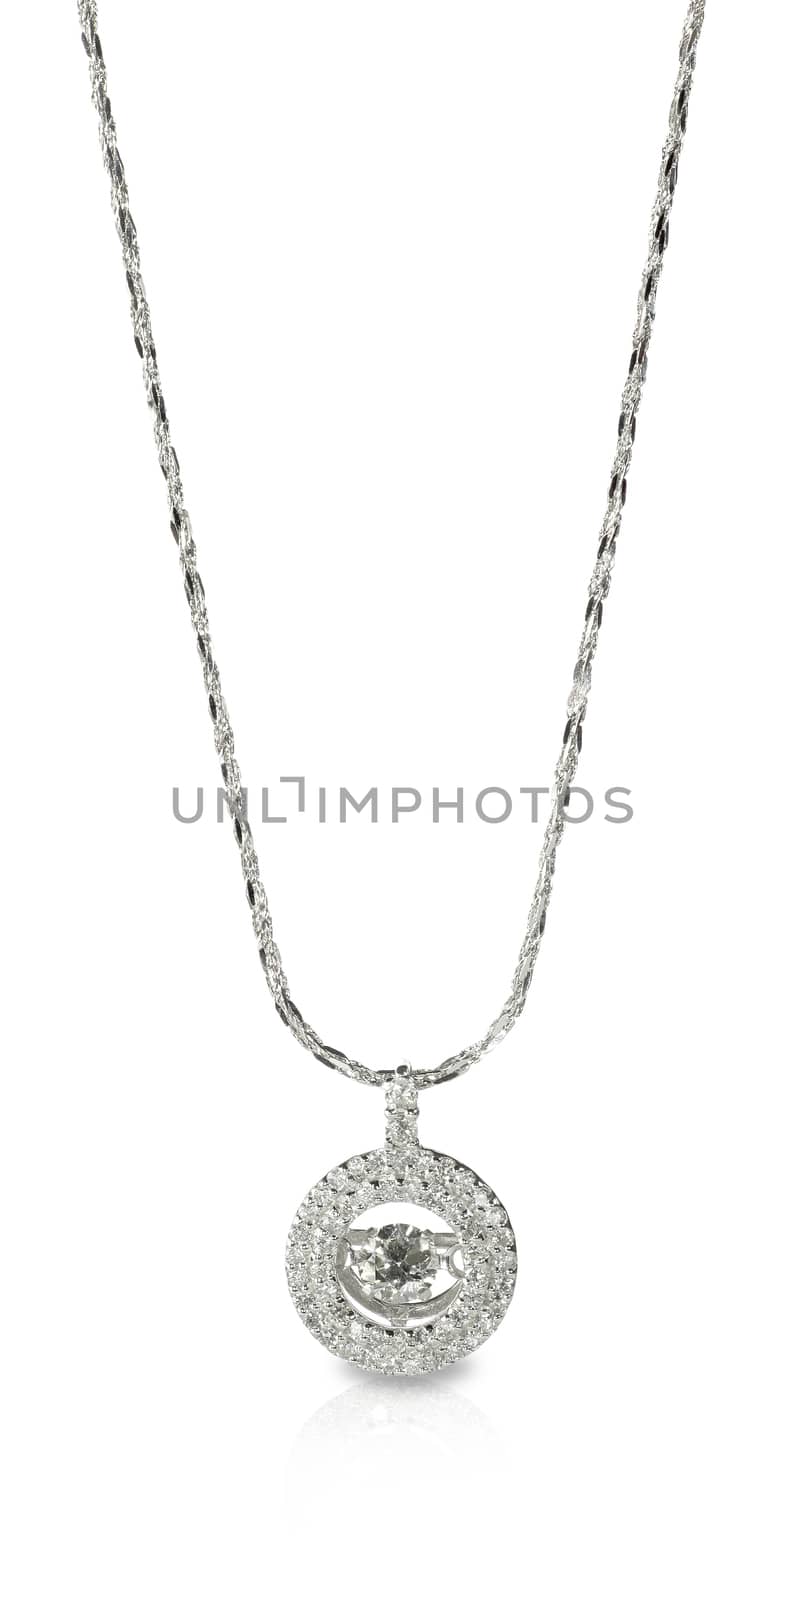 Diamond Pendant Necklace on a chain by fruitcocktail